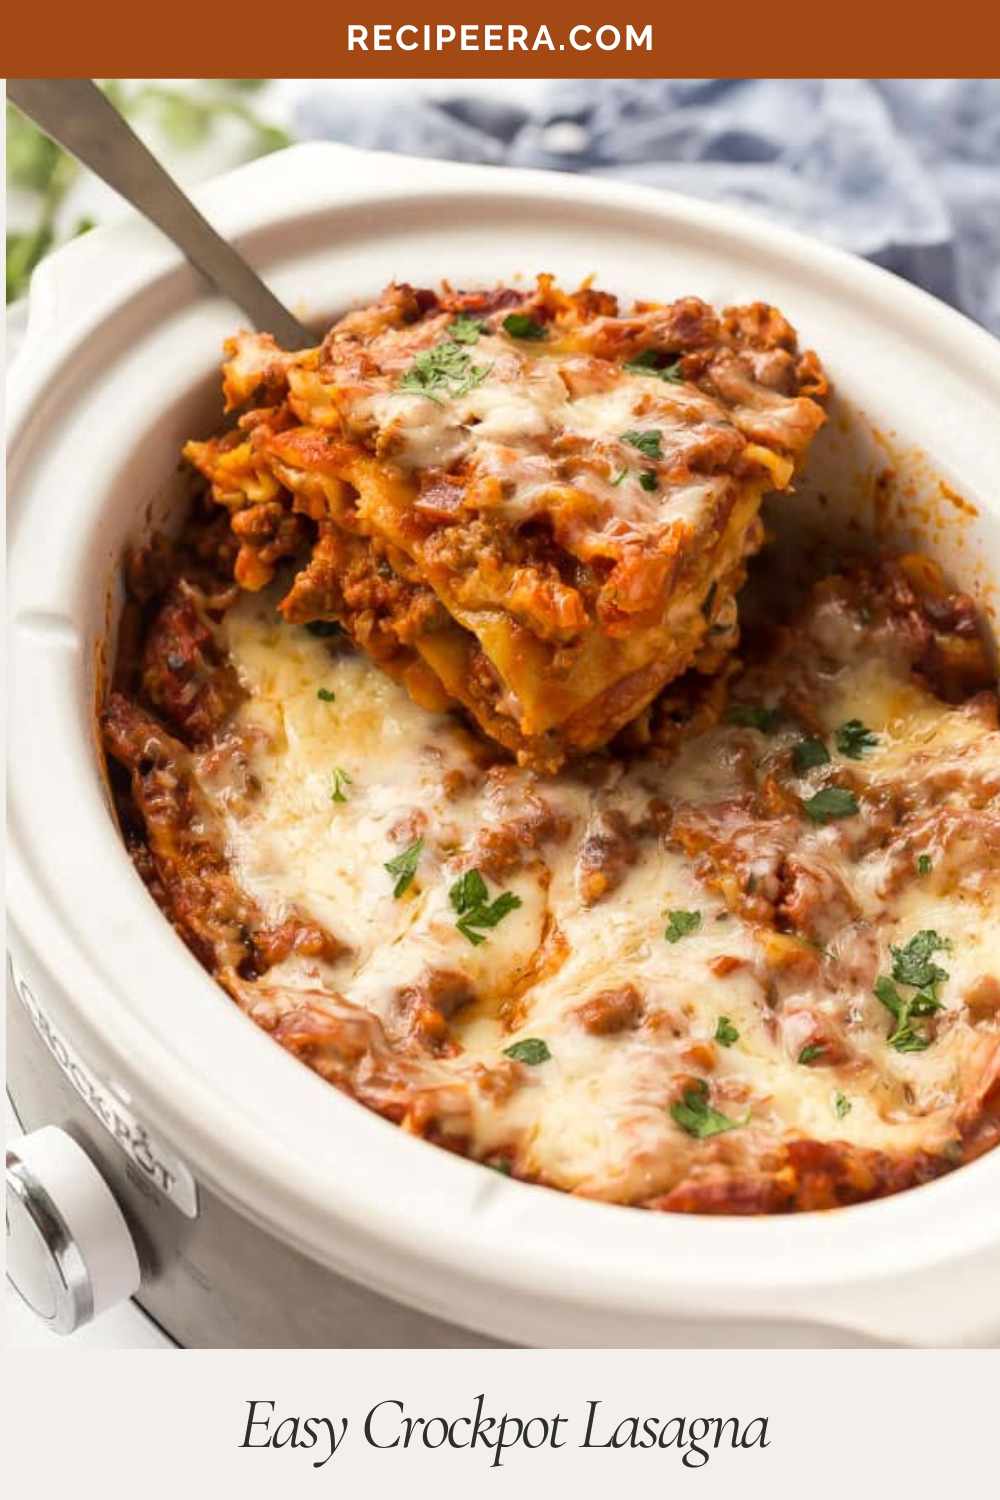 slice of lasagna being lifted out of crockpot